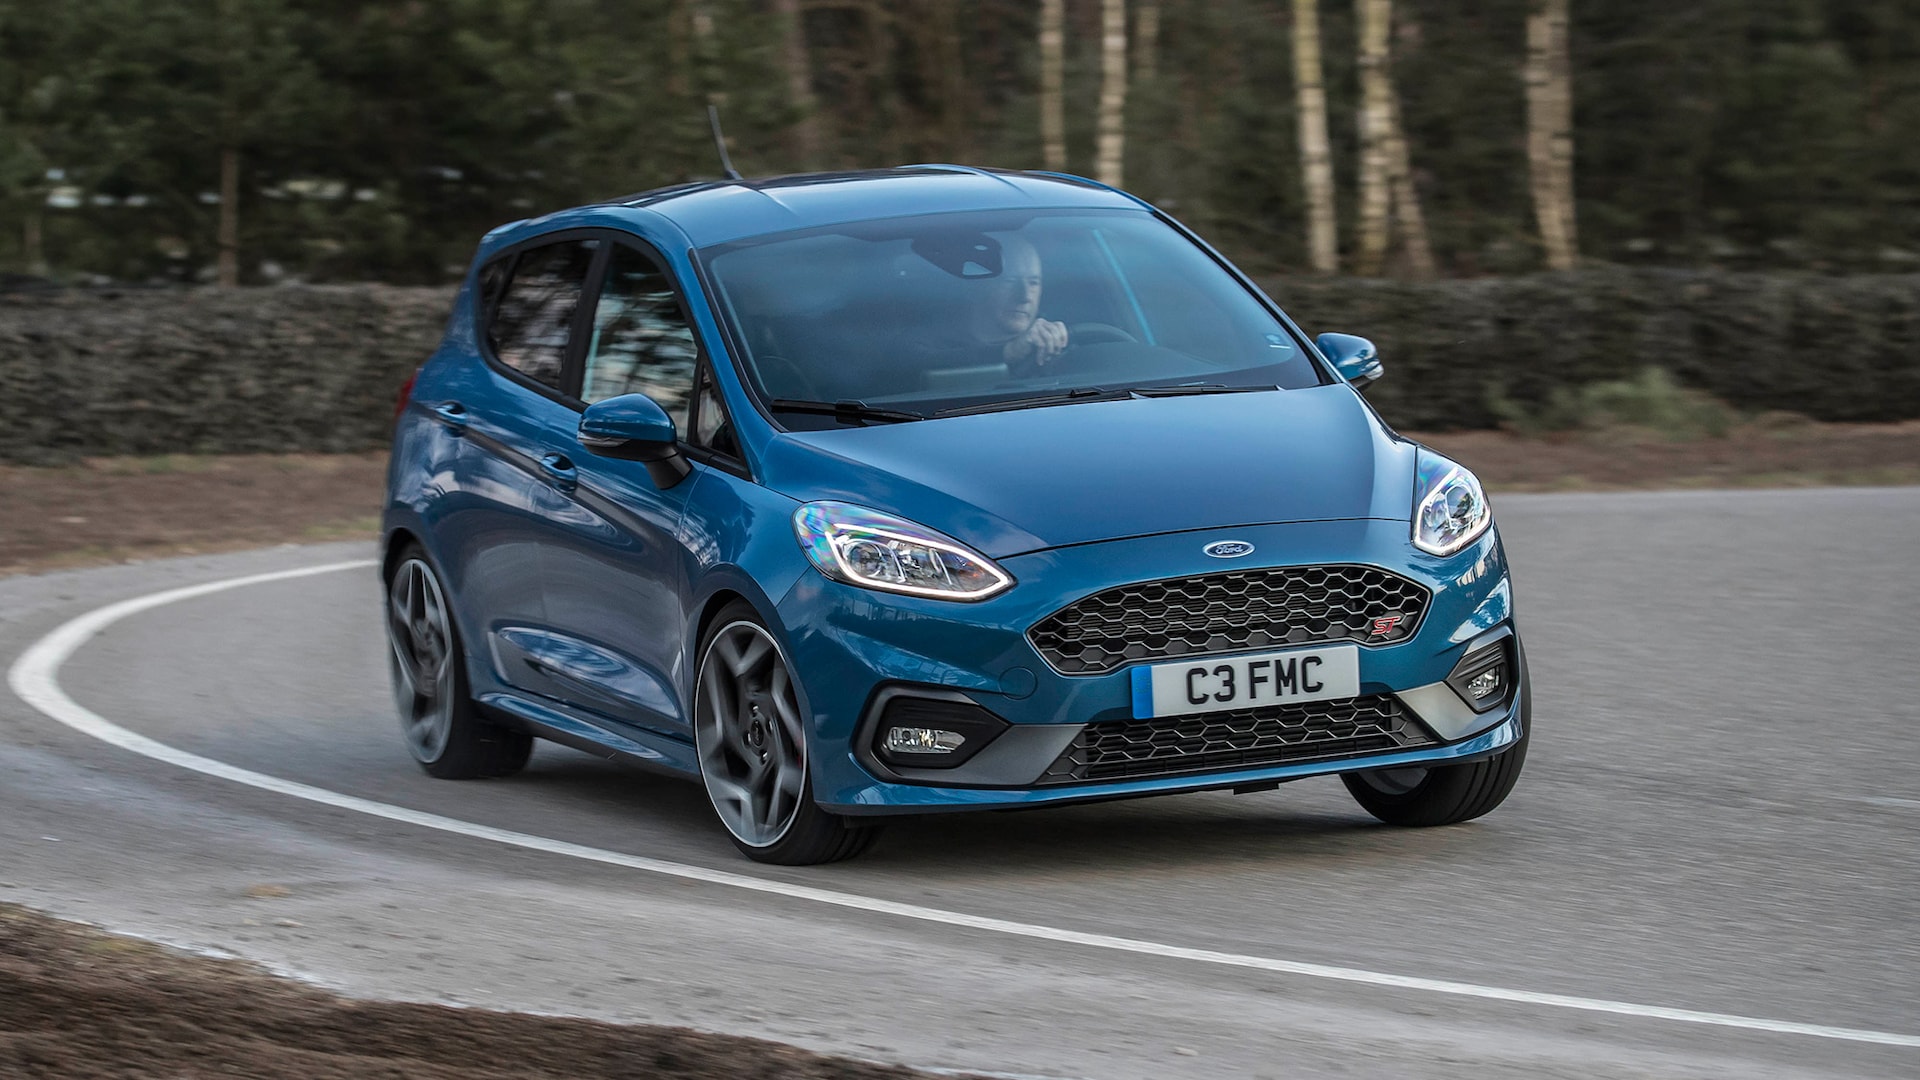 2019 Ford Fiesta ST Review: The First New Ford Car Americans Won't Get